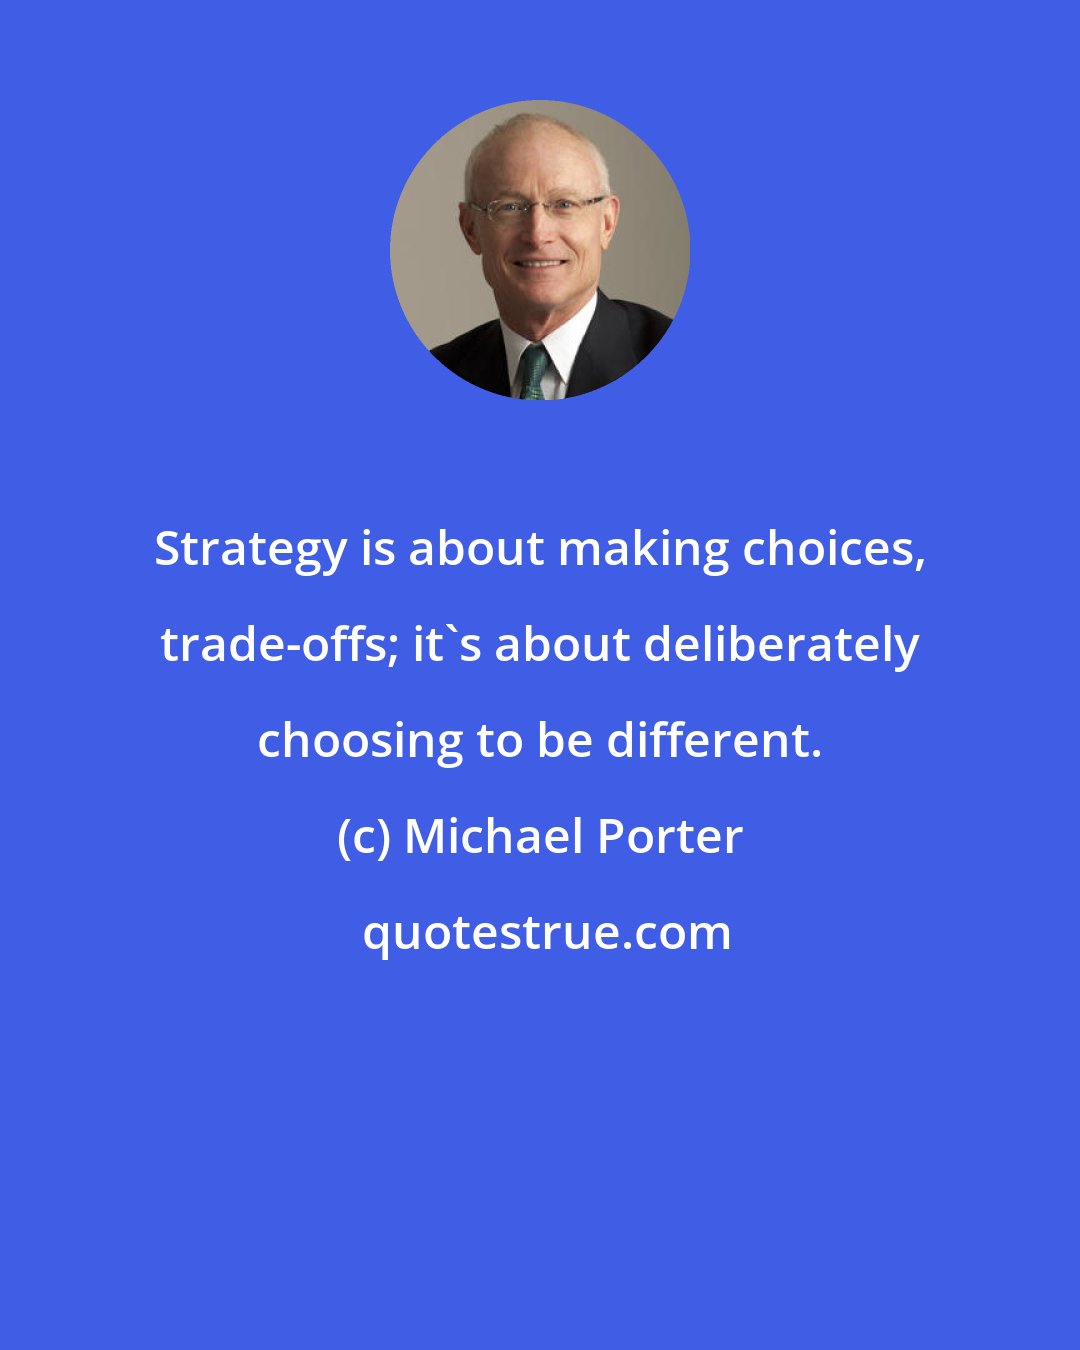 Michael Porter: Strategy is about making choices, trade-offs; it's about deliberately choosing to be different.